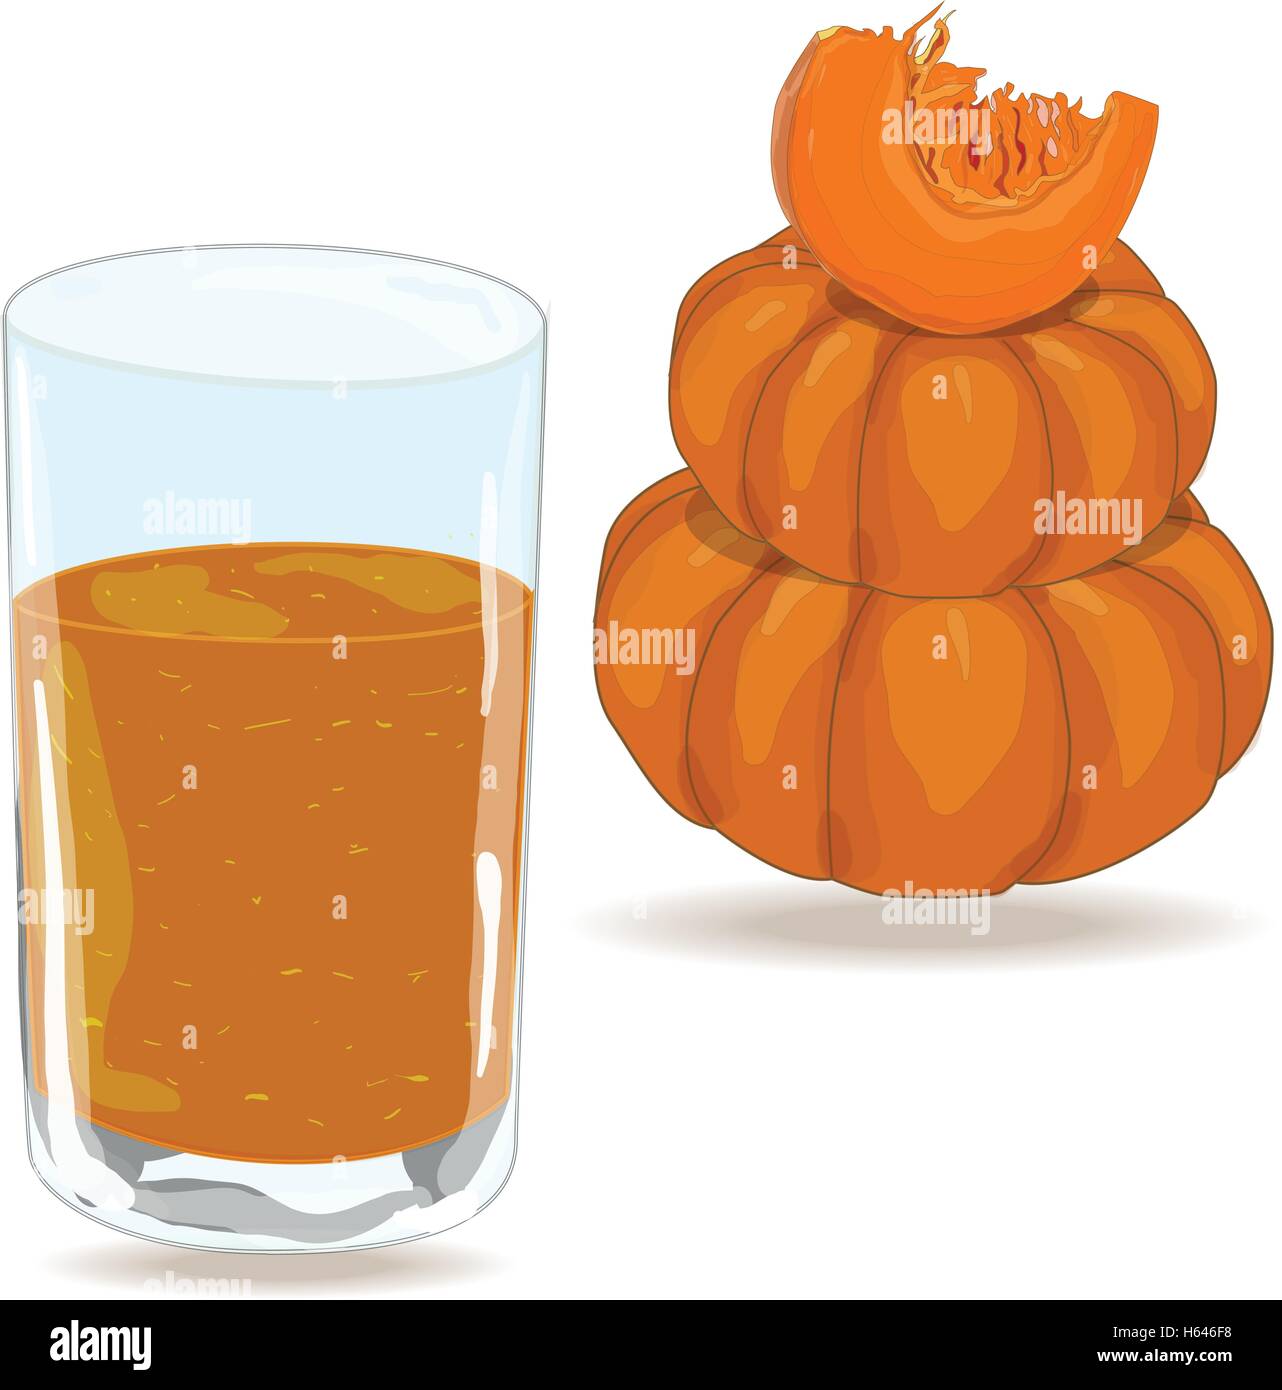 Piece of pumpkin behind glass of pumpkin juice isolated on white Stock Vector